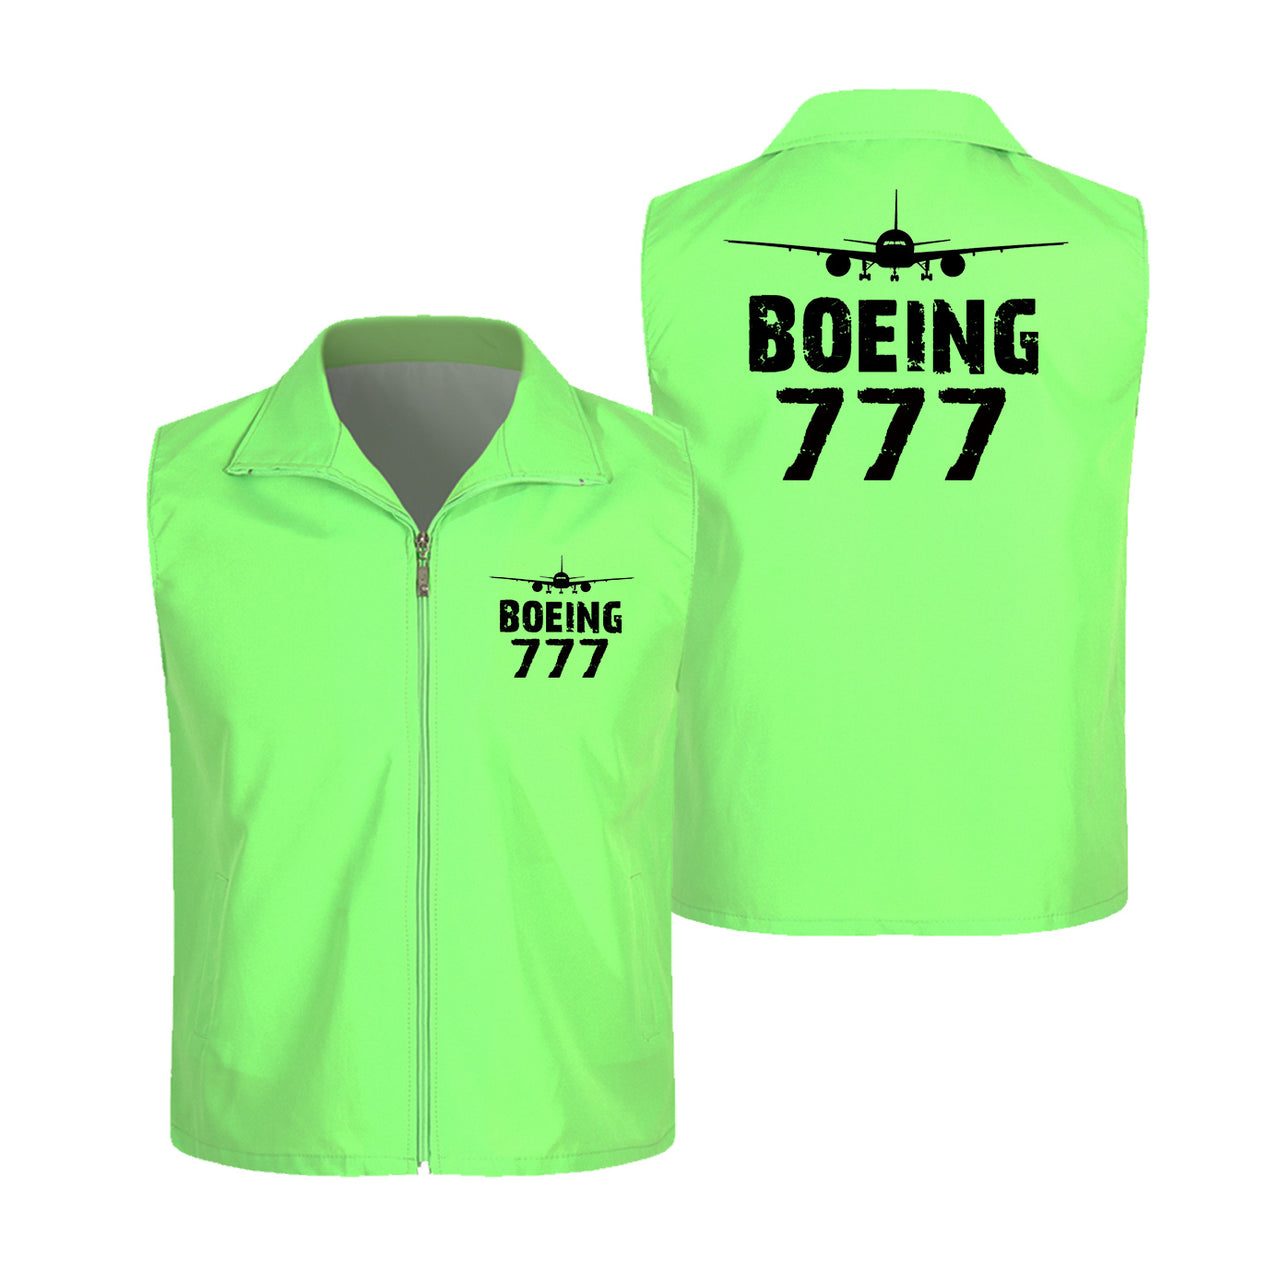 Boeing 777 & Plane Designed Thin Style Vests